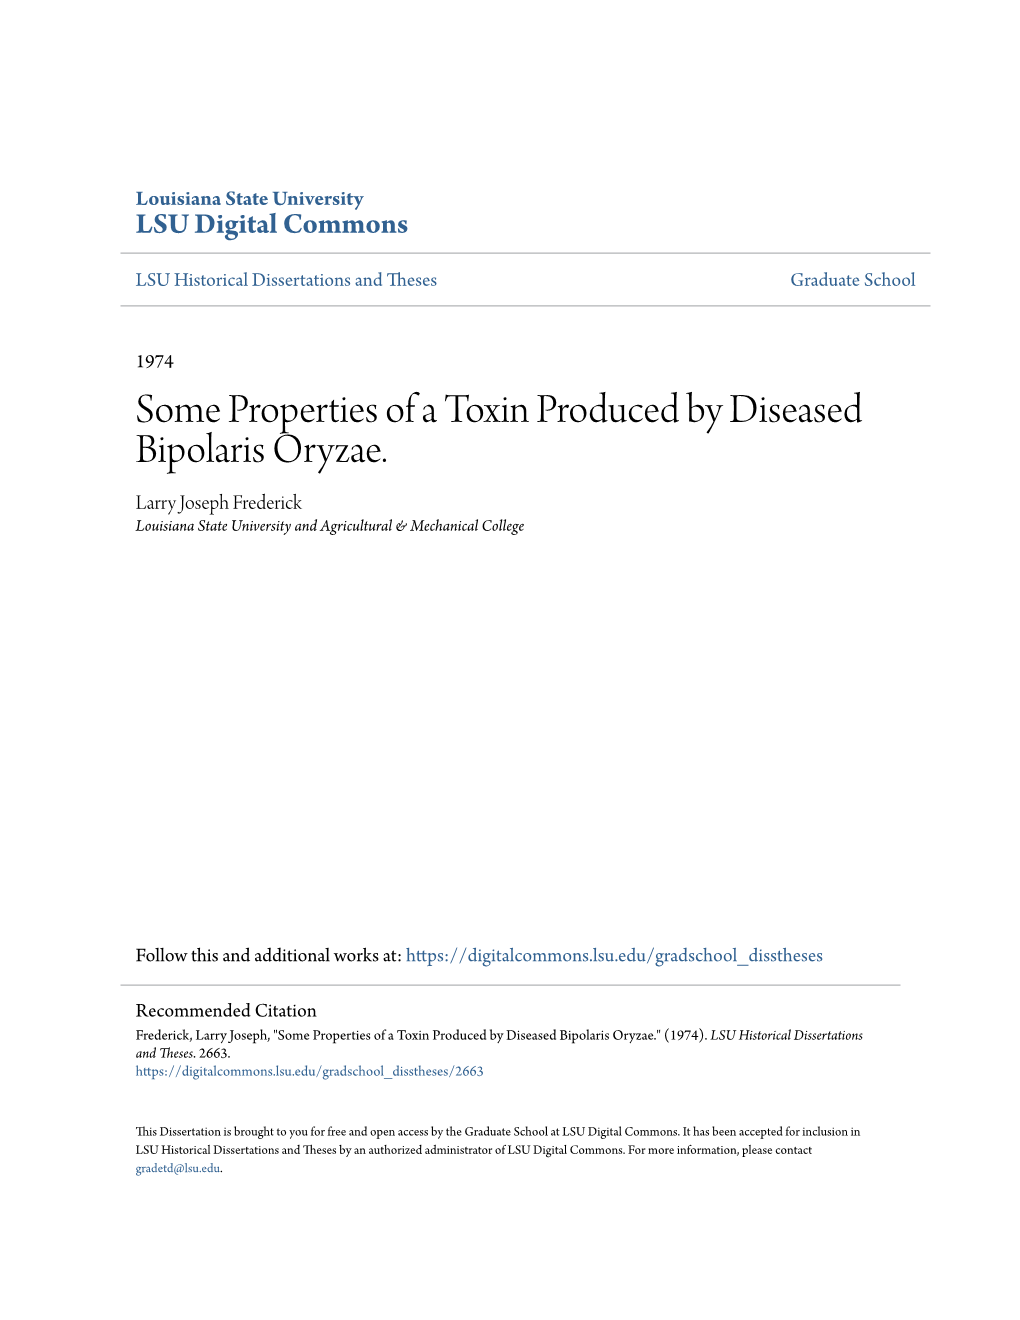 Some Properties of a Toxin Produced by Diseased Bipolaris Oryzae. Larry Joseph Frederick Louisiana State University and Agricultural & Mechanical College